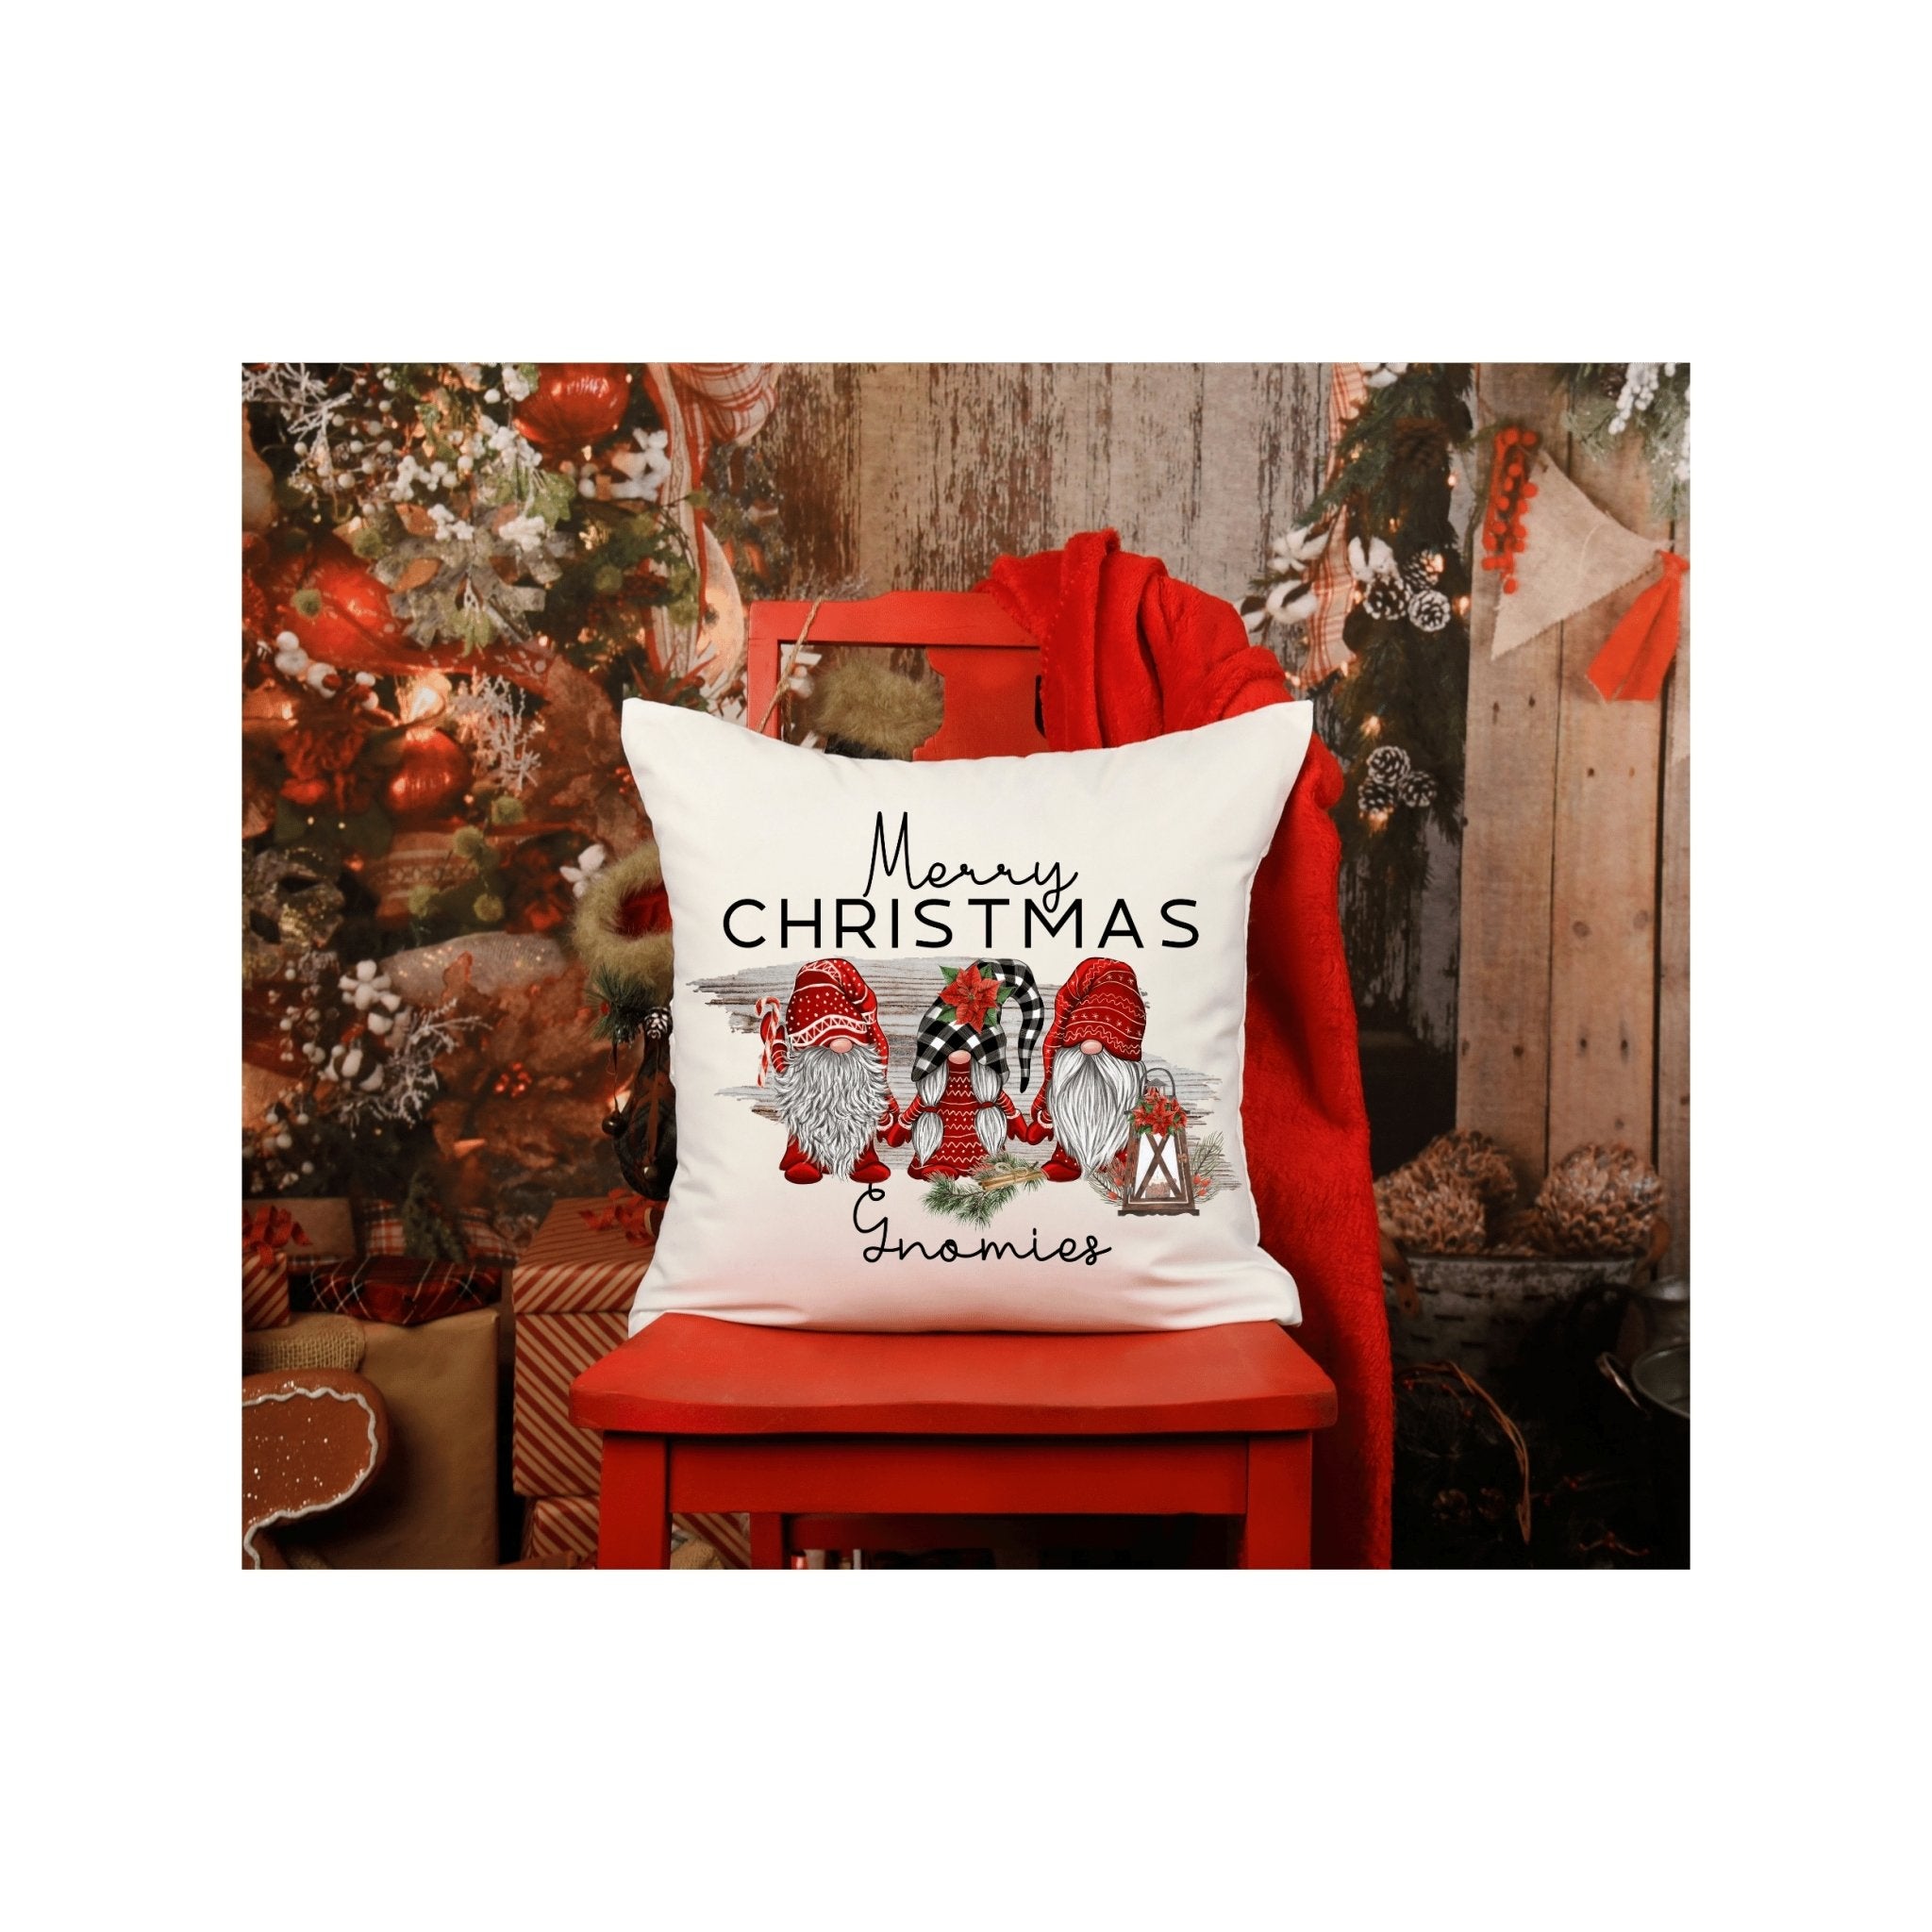 Merry Christmas Gnomies Sublimated Pillow Cover - Trendznmore